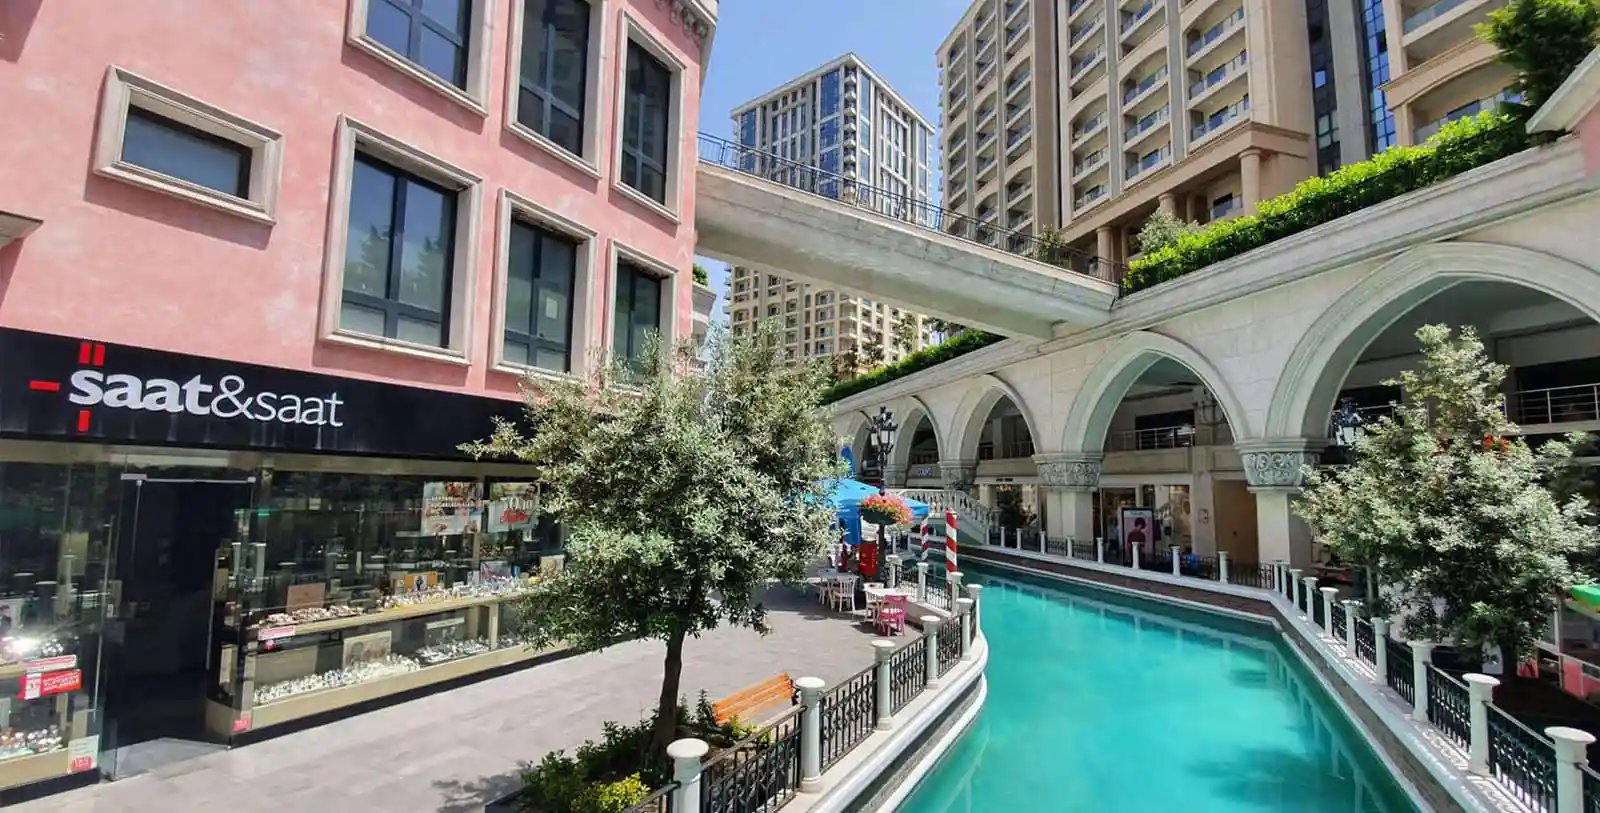 Venizia mall in Istanbul has canals like those of Venice city in Italy.